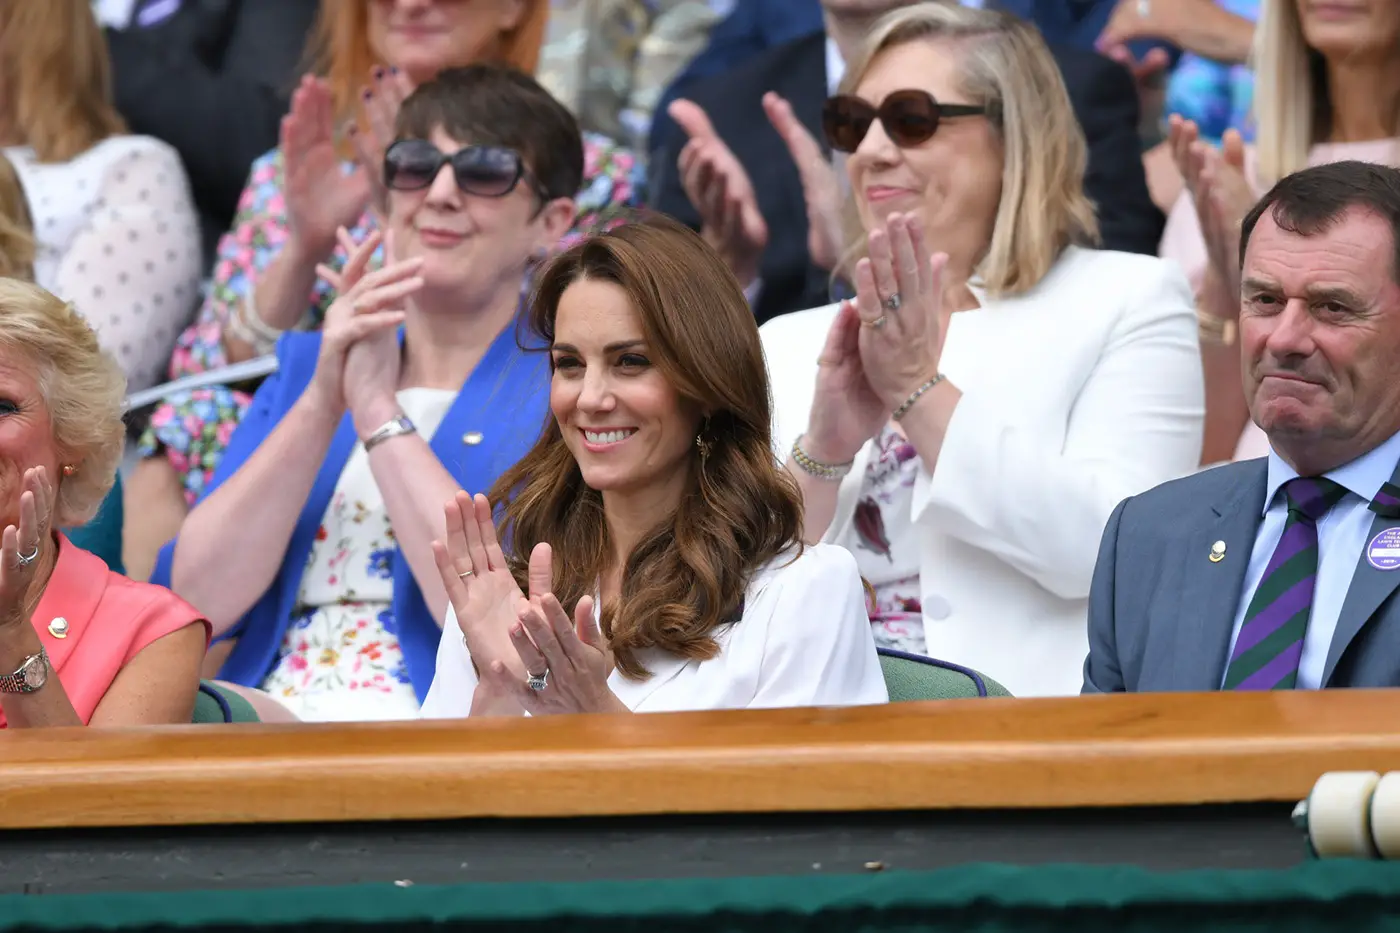 The Duchess of Cambride visited Wimbledon as the patron of the Lawn Tennis wearing white suzannah dress